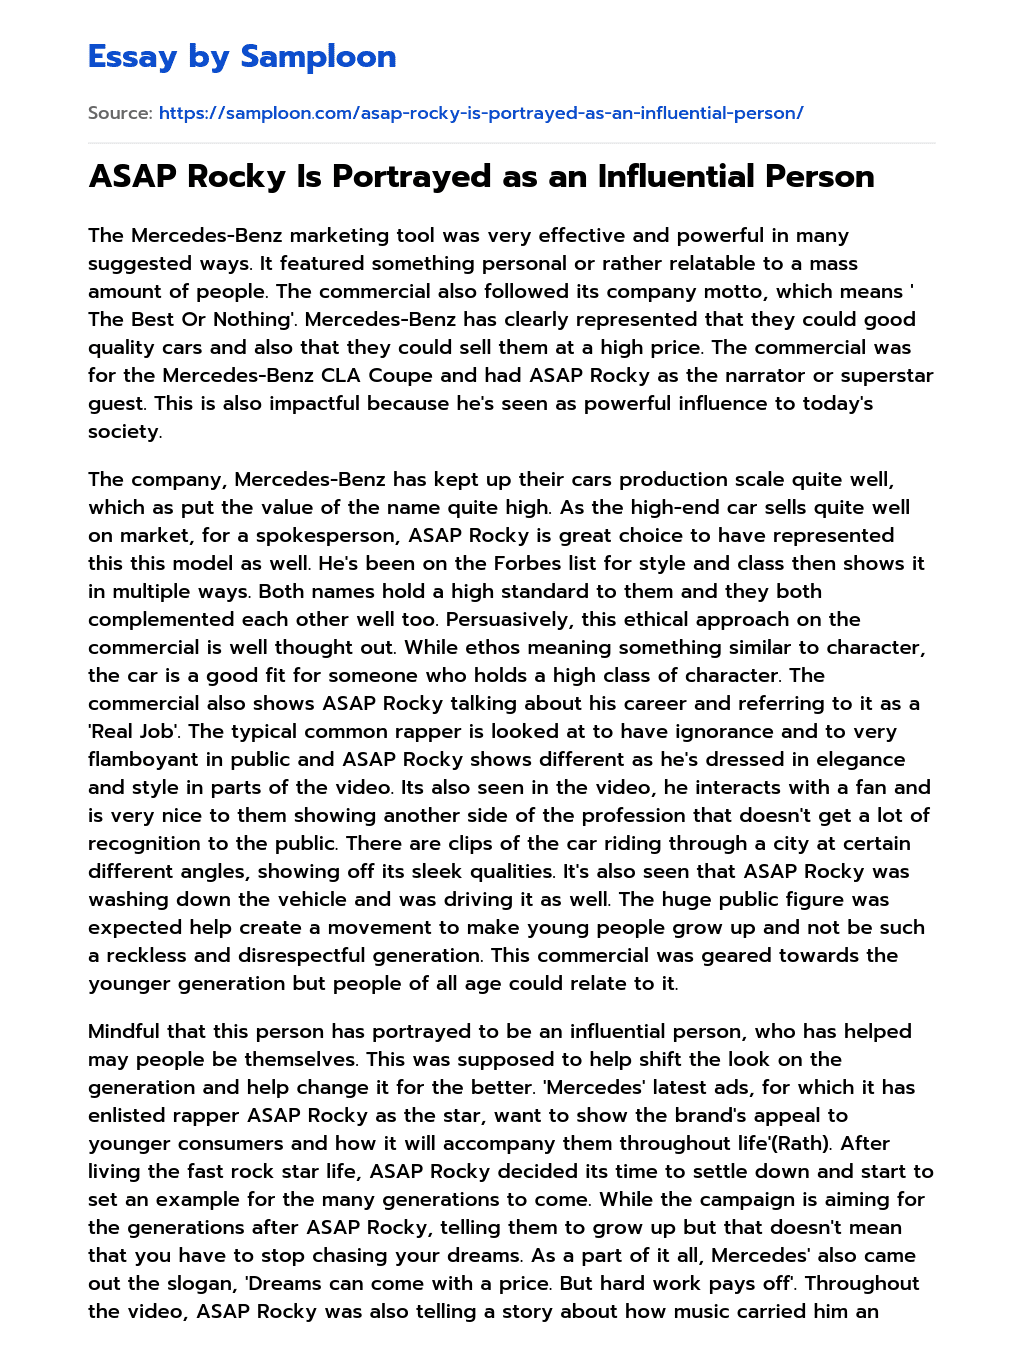 ASAP Rocky Is Portrayed as an Influential Person essay